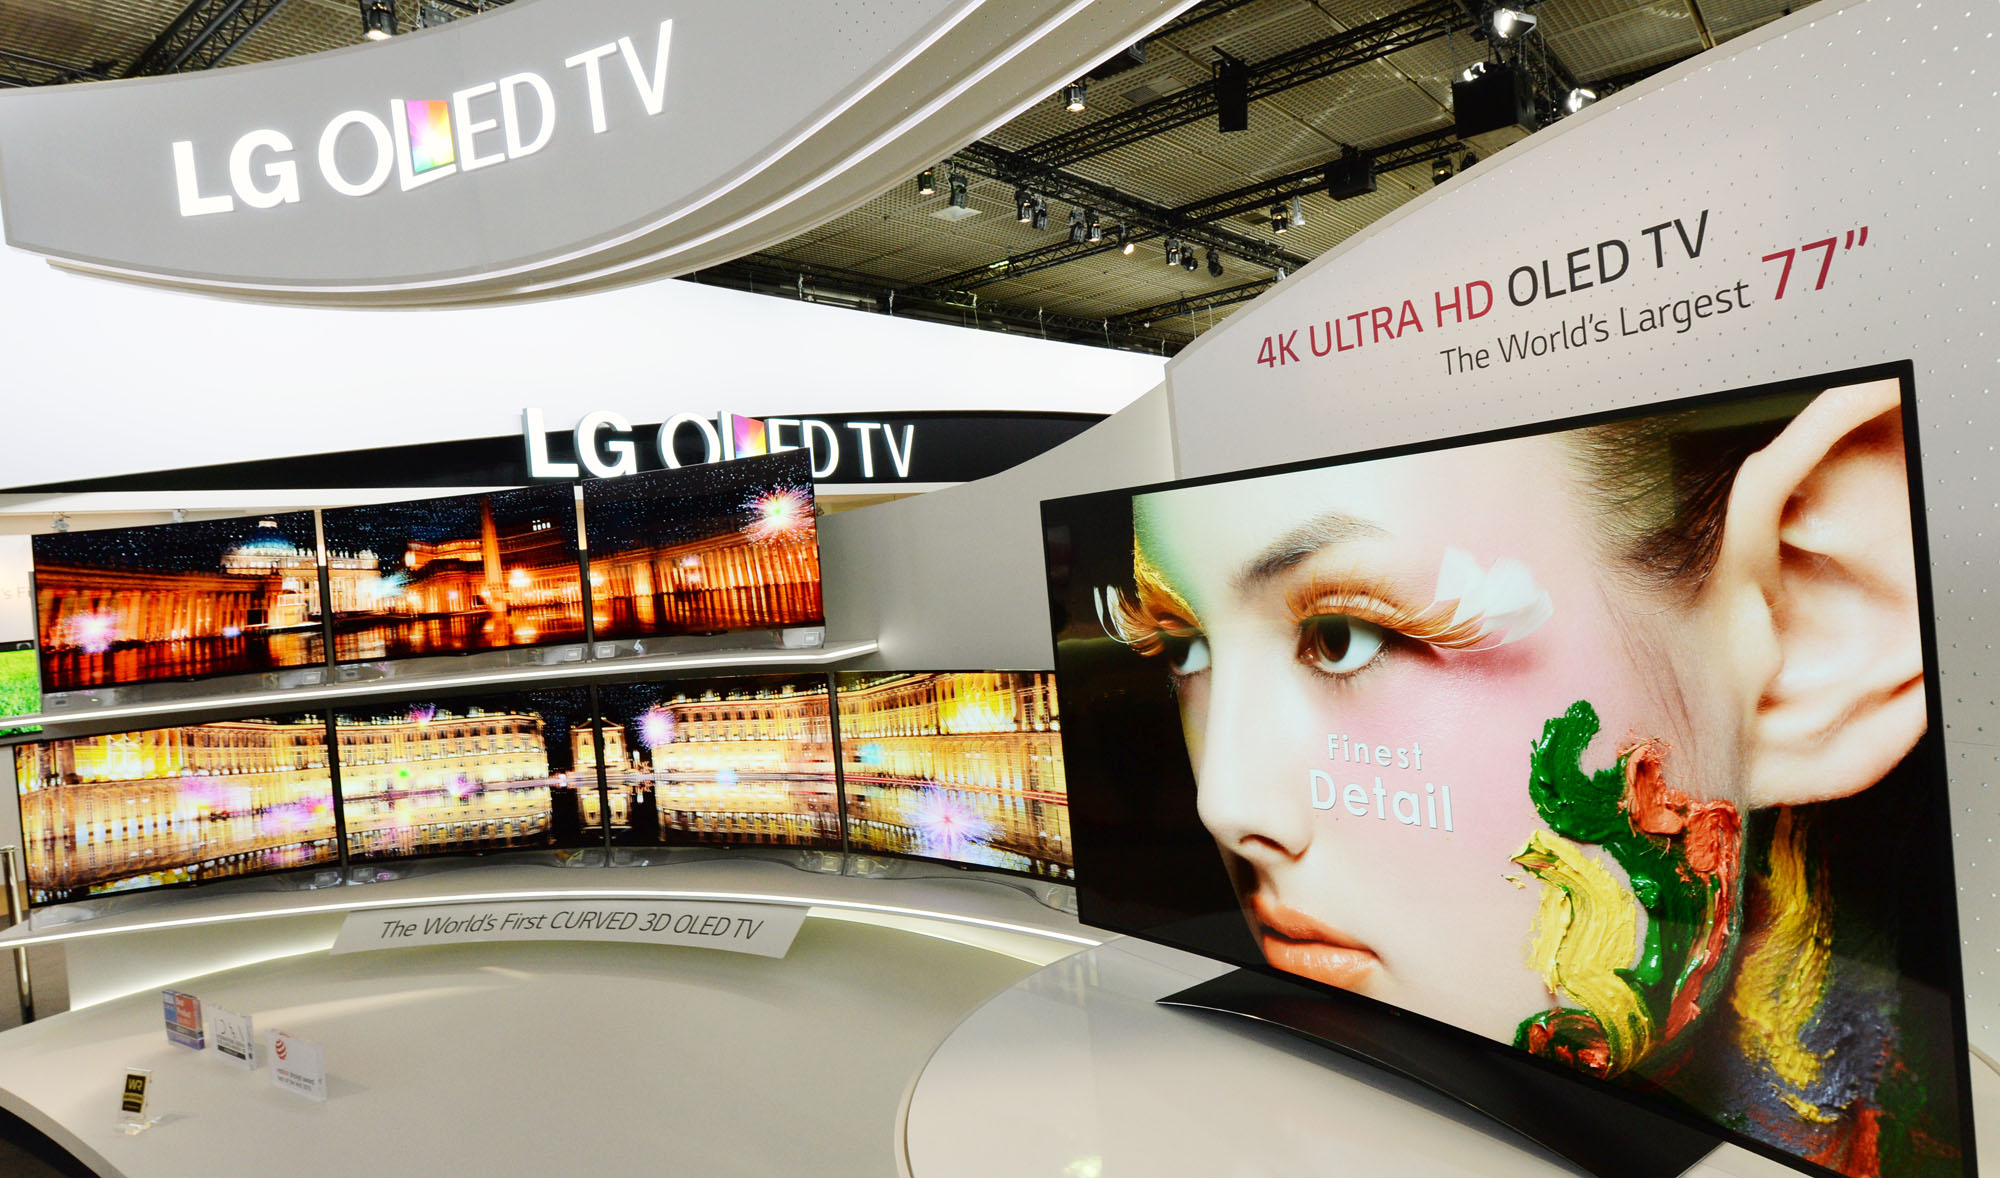 LG is showcasing the 77-inch ULTRA HD OLED TV at IFA 2013